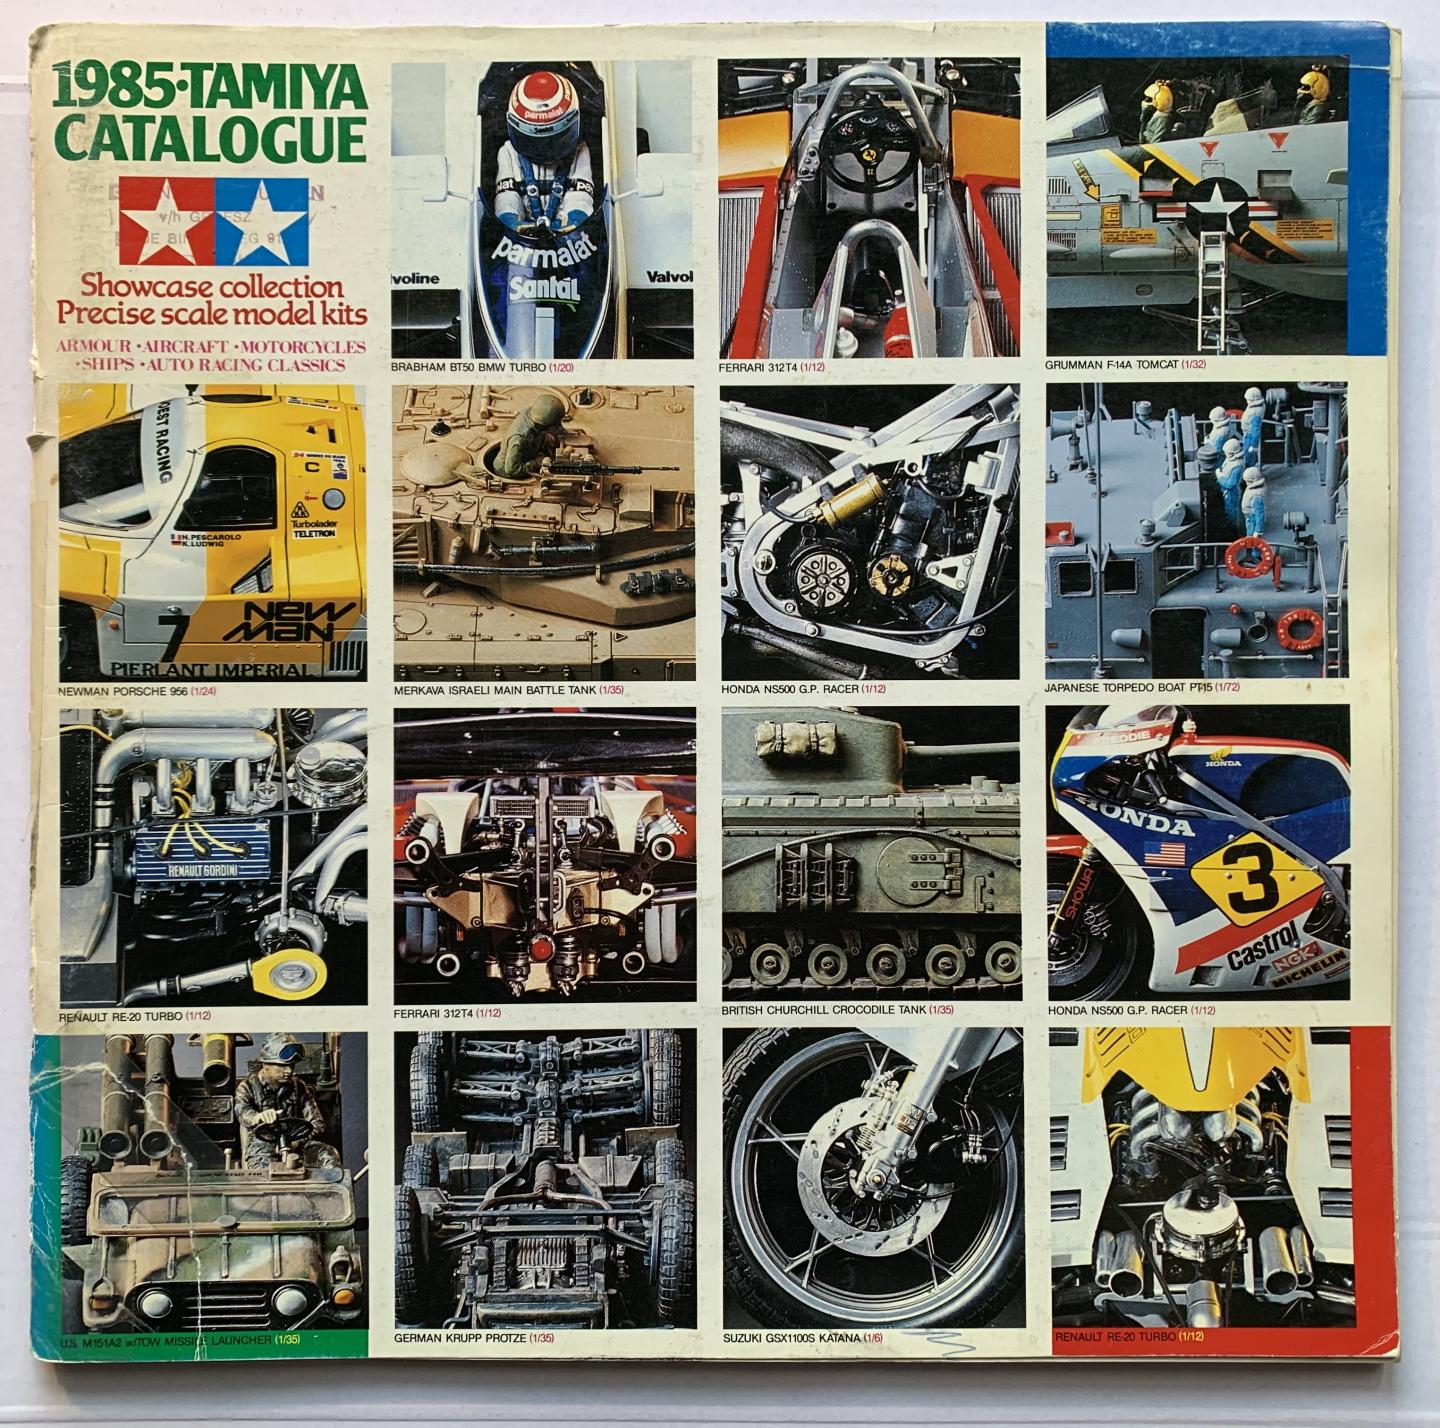 N.N. - 1985. Tamiya Catalogue. Showcase Collection precise scale model kits; armour, aircraft, motorcycles, ships, auto racing classics.